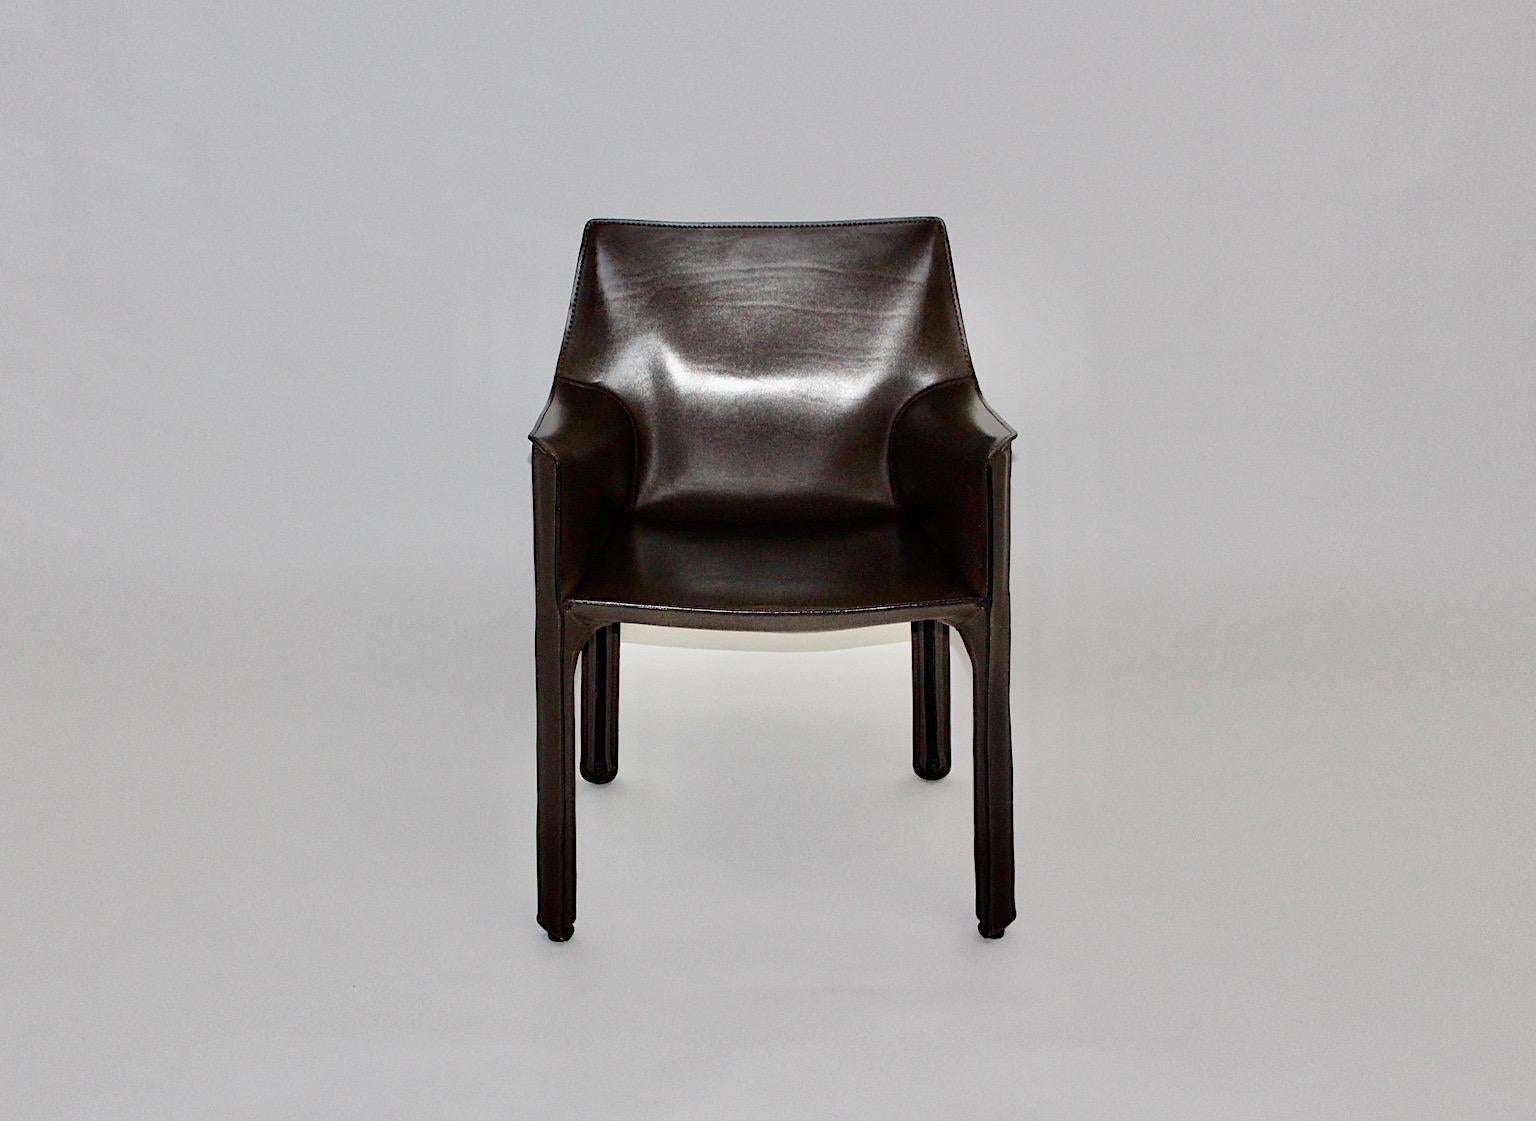 Metal Mario Bellini Vintage Chocolate Brown Leather Dining Chairs Cassina 1970s Italy For Sale